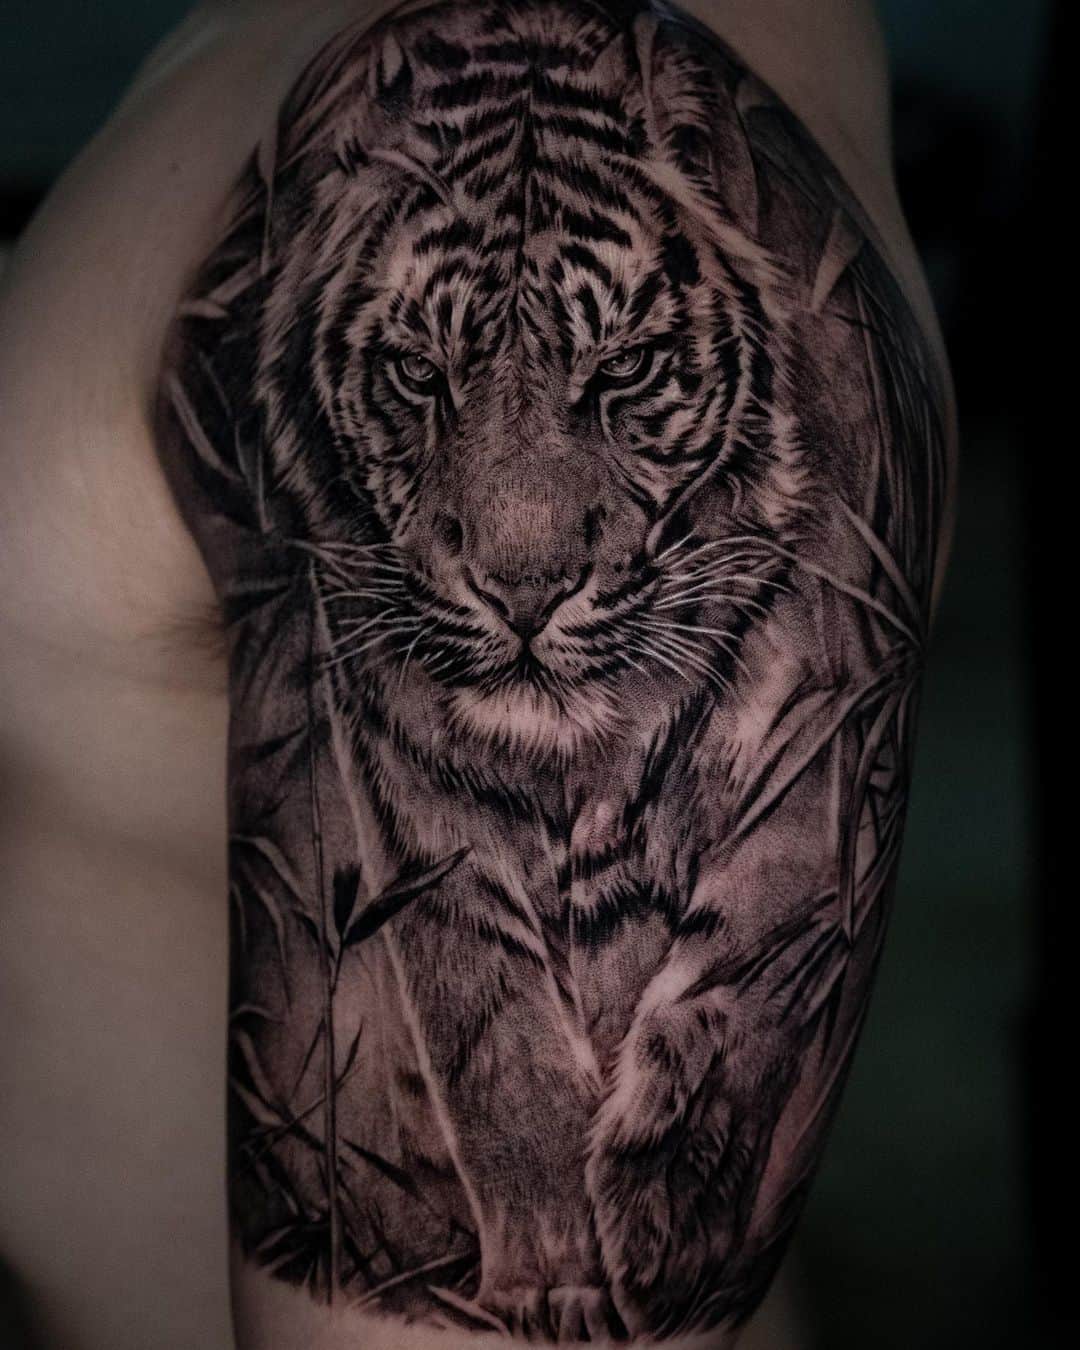 HR Tattoo Shop - Glasgow - Tiger and dancer upper arm piece, done by LASZLO  He has spaces in October / November this year. ✓Booking:  www.hrtattooshop.com #glasgowtattoo #hrtattooshop #upperarmtattoo  #sleevetattoo #tiger #tigertattoo #